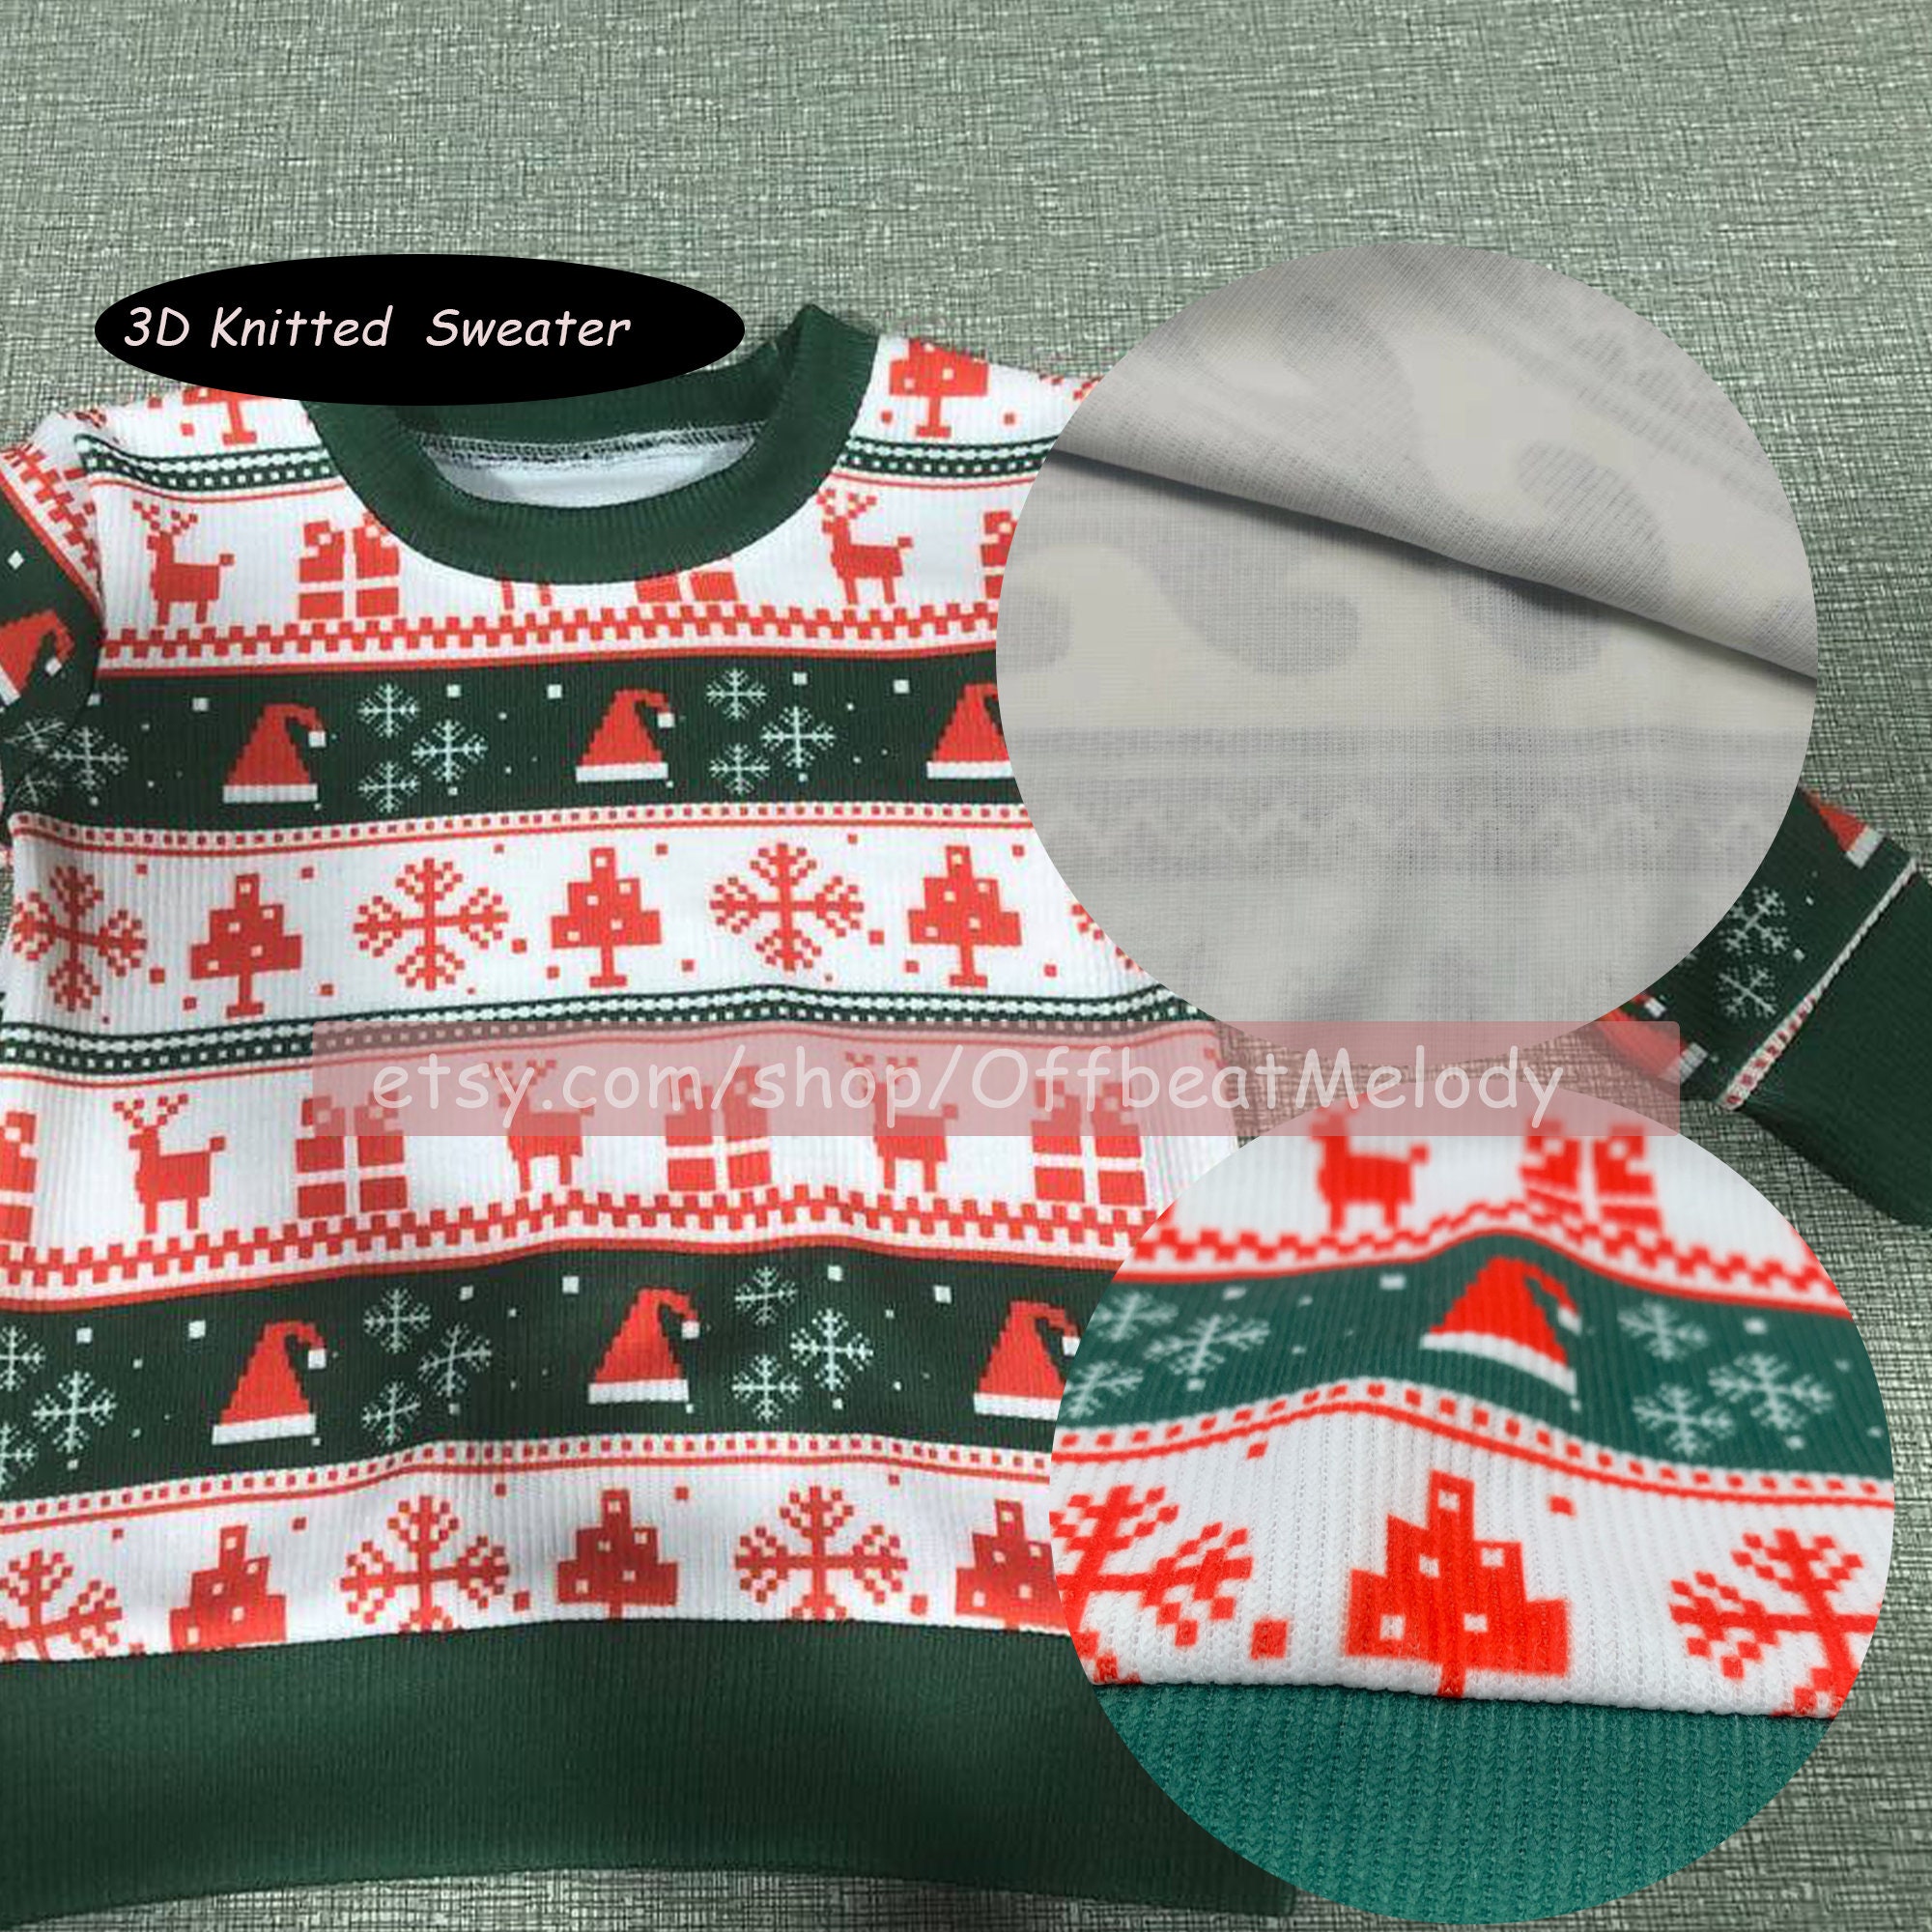 Dunkin Donuts Ugly Christmas 3D Sweater